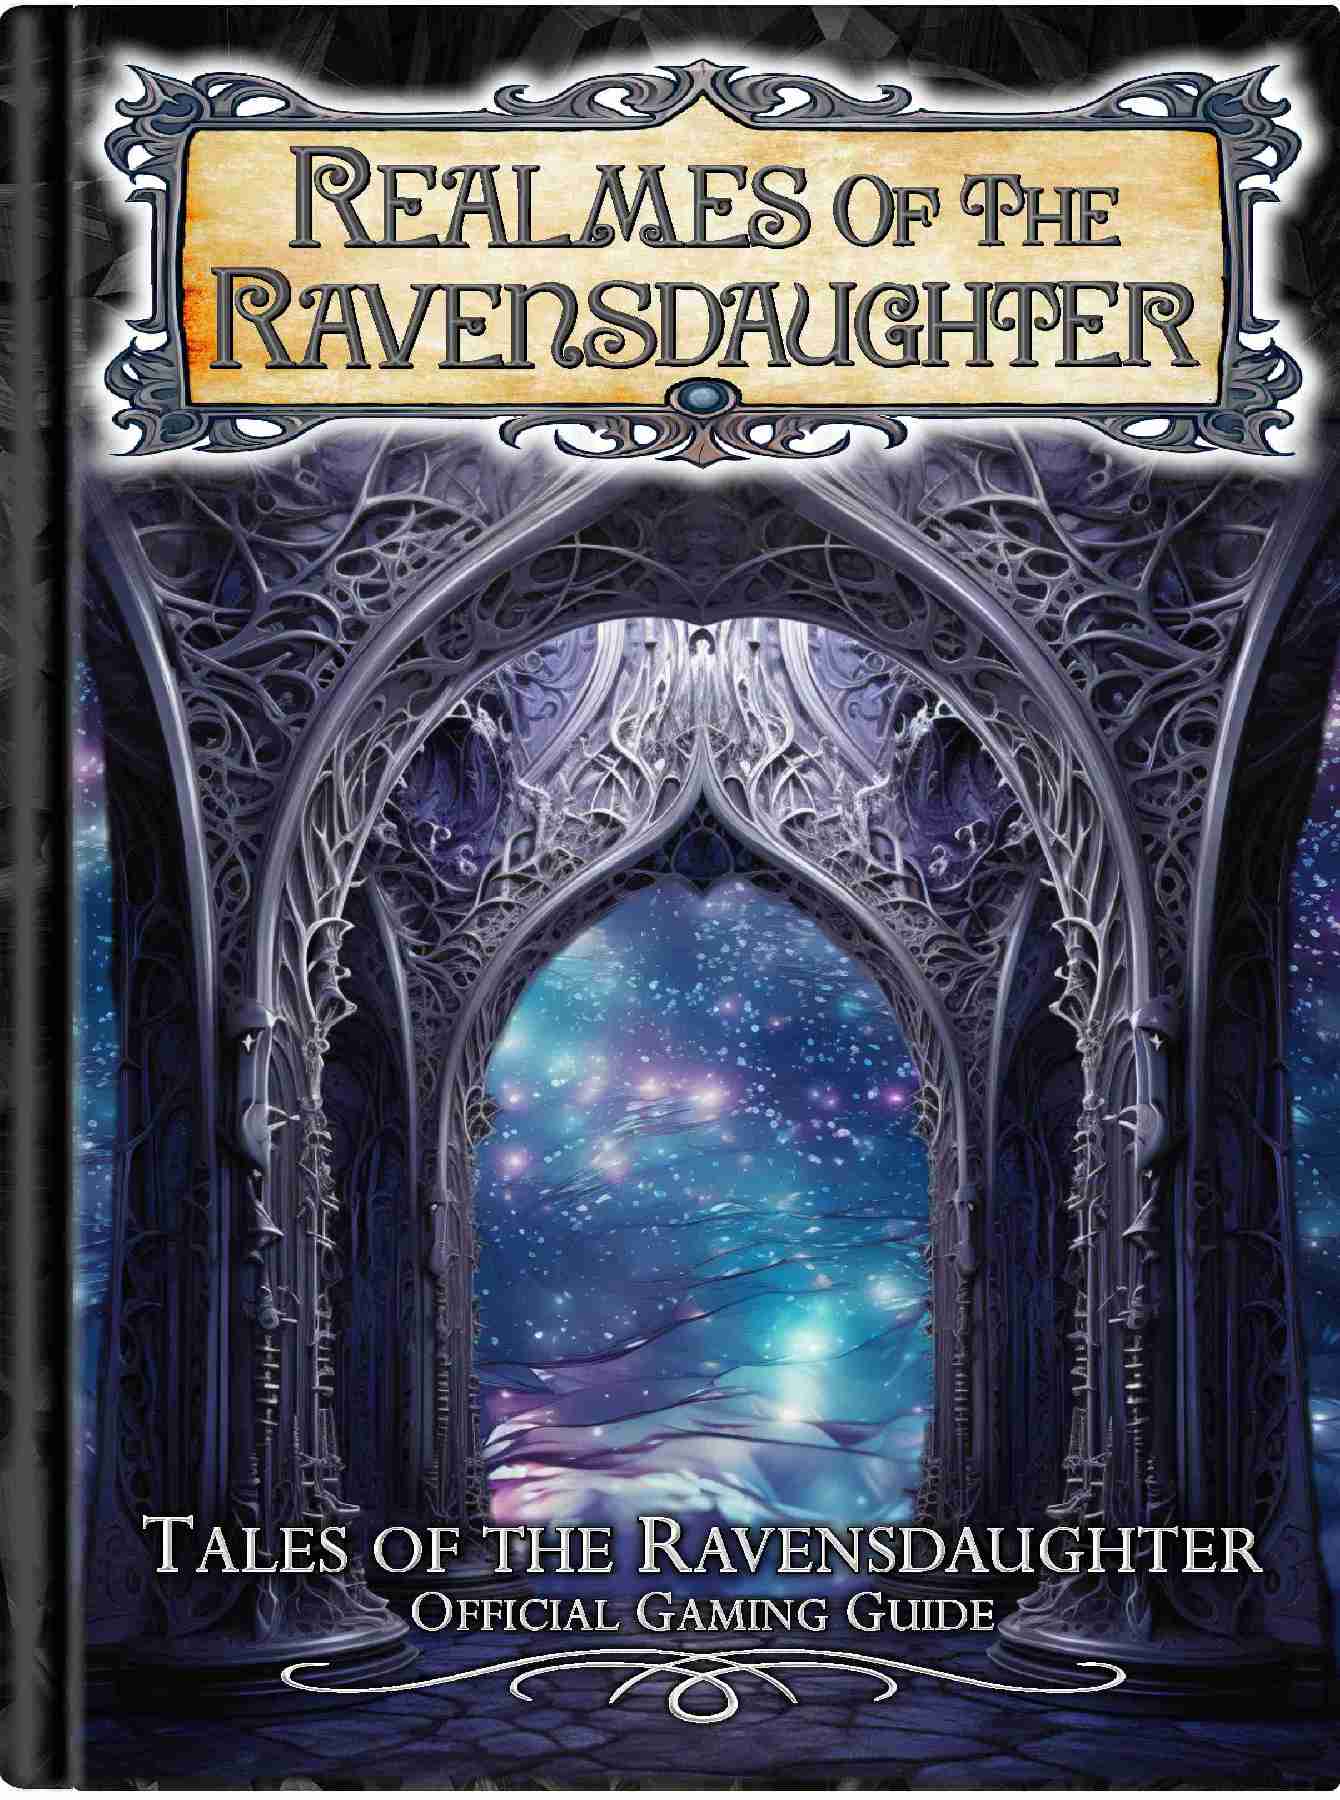 Realmes of the Ravensdaughter RPG Guide AND Gray Warrior Hardcover Books